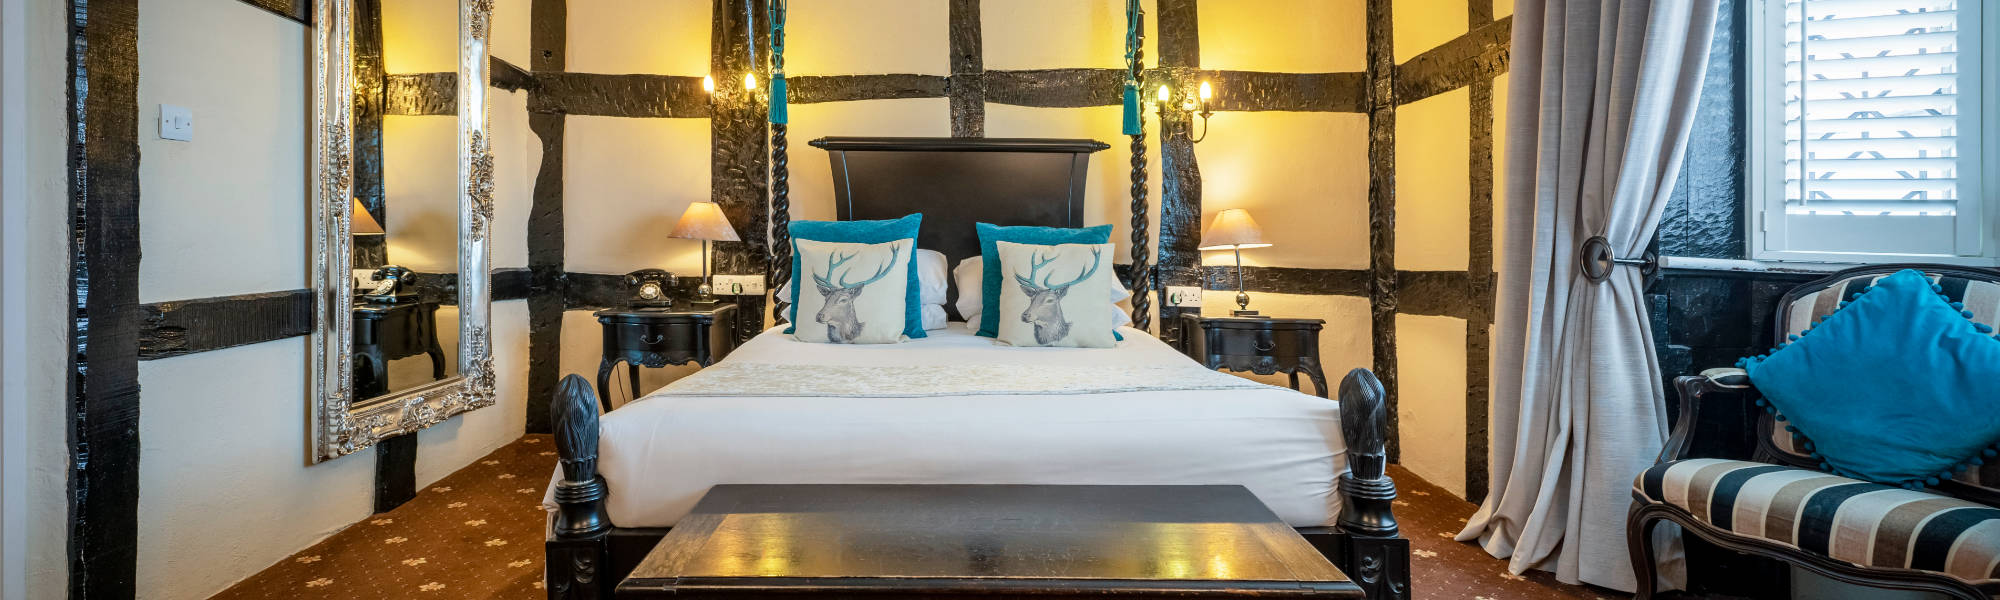 Historic hotel rooms at the White Swan Hotel in Henley-in-Arden